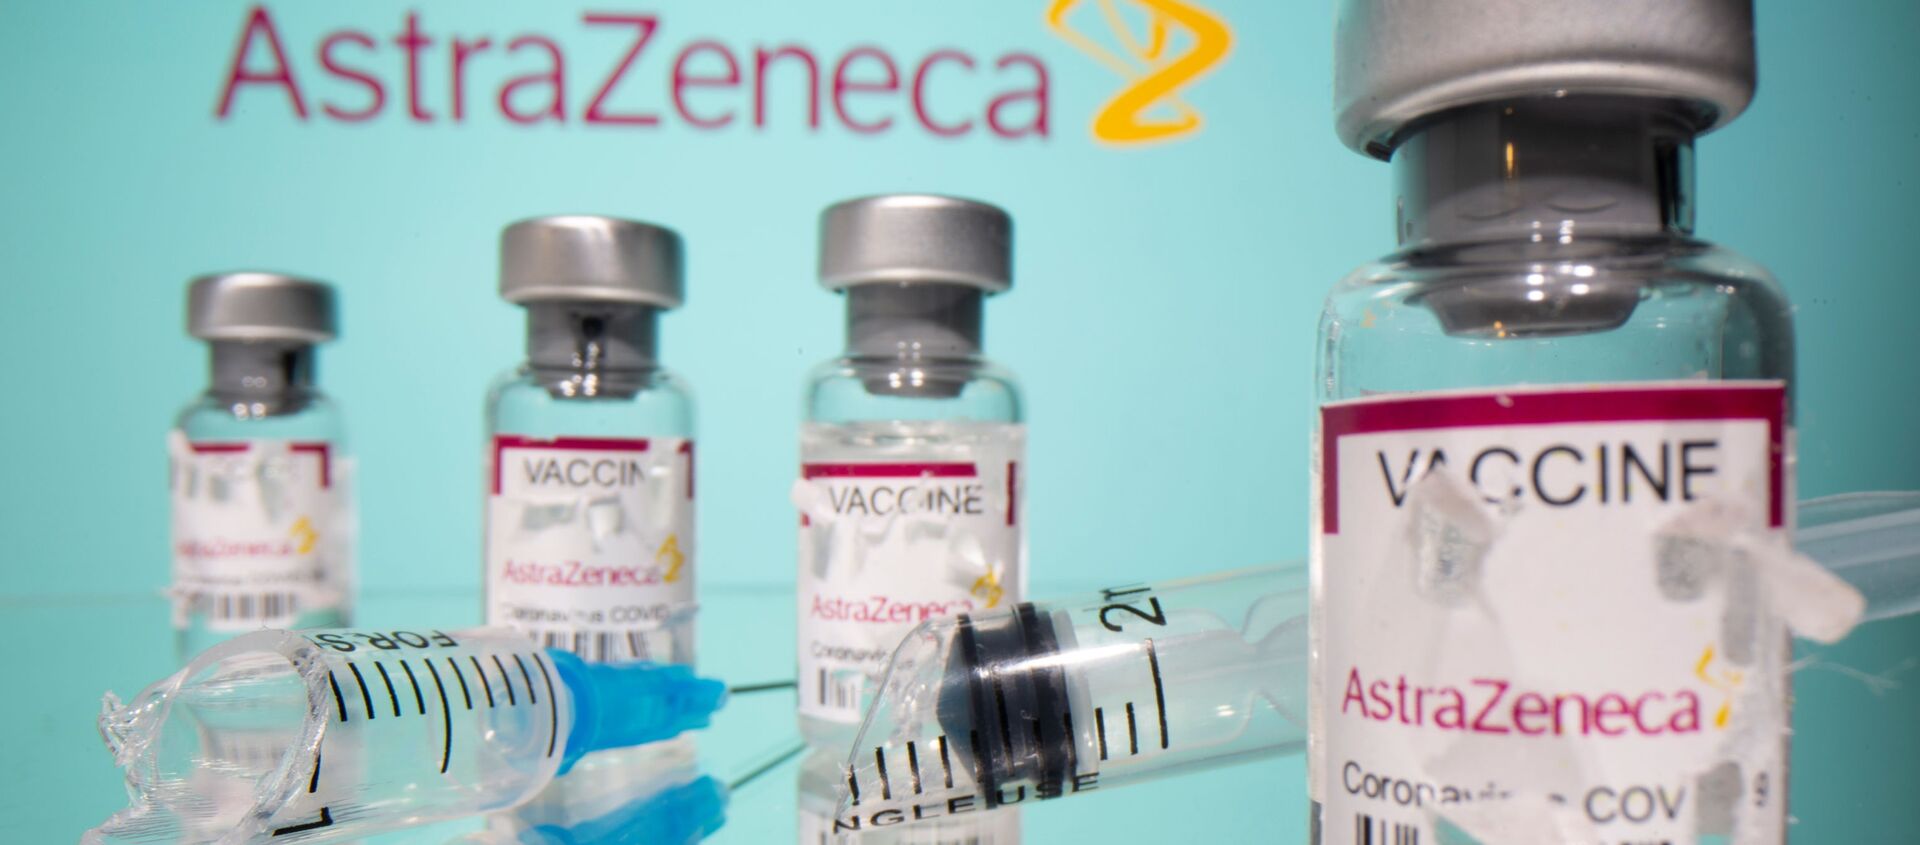 Vials labelled with broken sticker AstraZeneca COVID-19 Coronavirus Vaccine and a broken syringe are seen in front of a displayed AstraZeneca logo in this illustration taken March 15, 2021. - Sputnik International, 1920, 19.03.2021